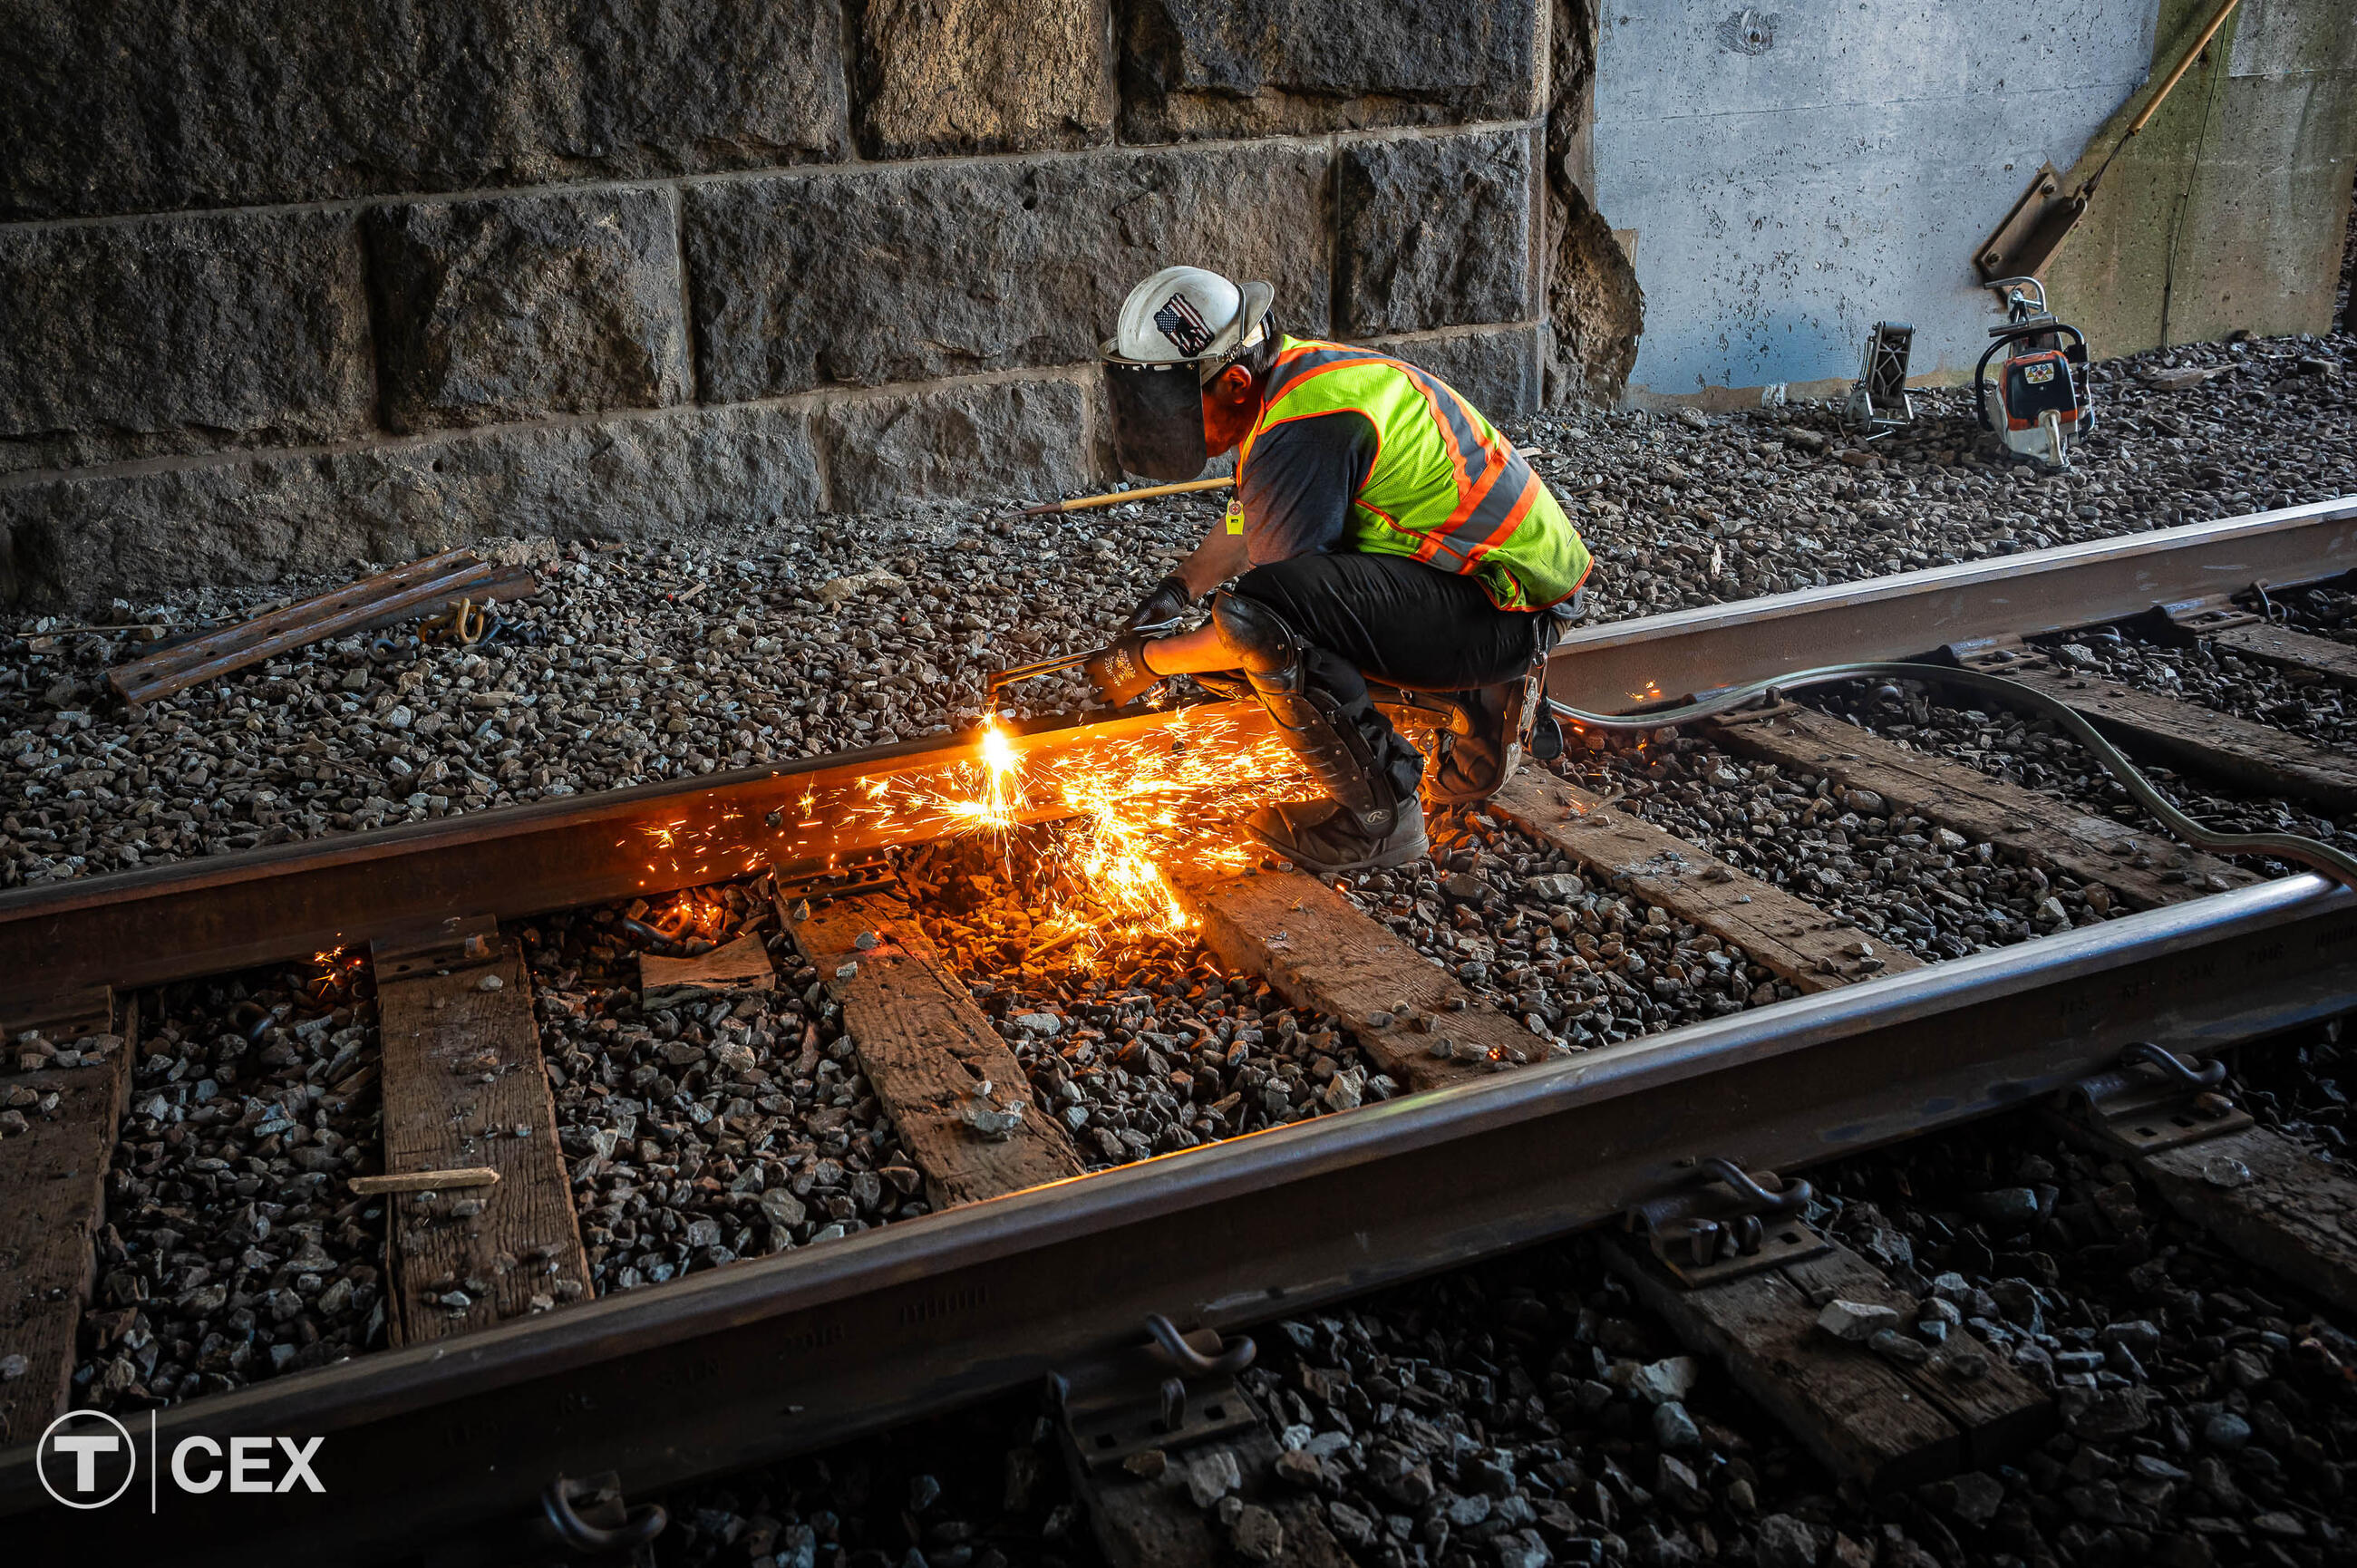 Crews worked in critical track areas during the April Blue Line diversion. Complimentary photo by the MBTA Customer and Employee Experience Department.